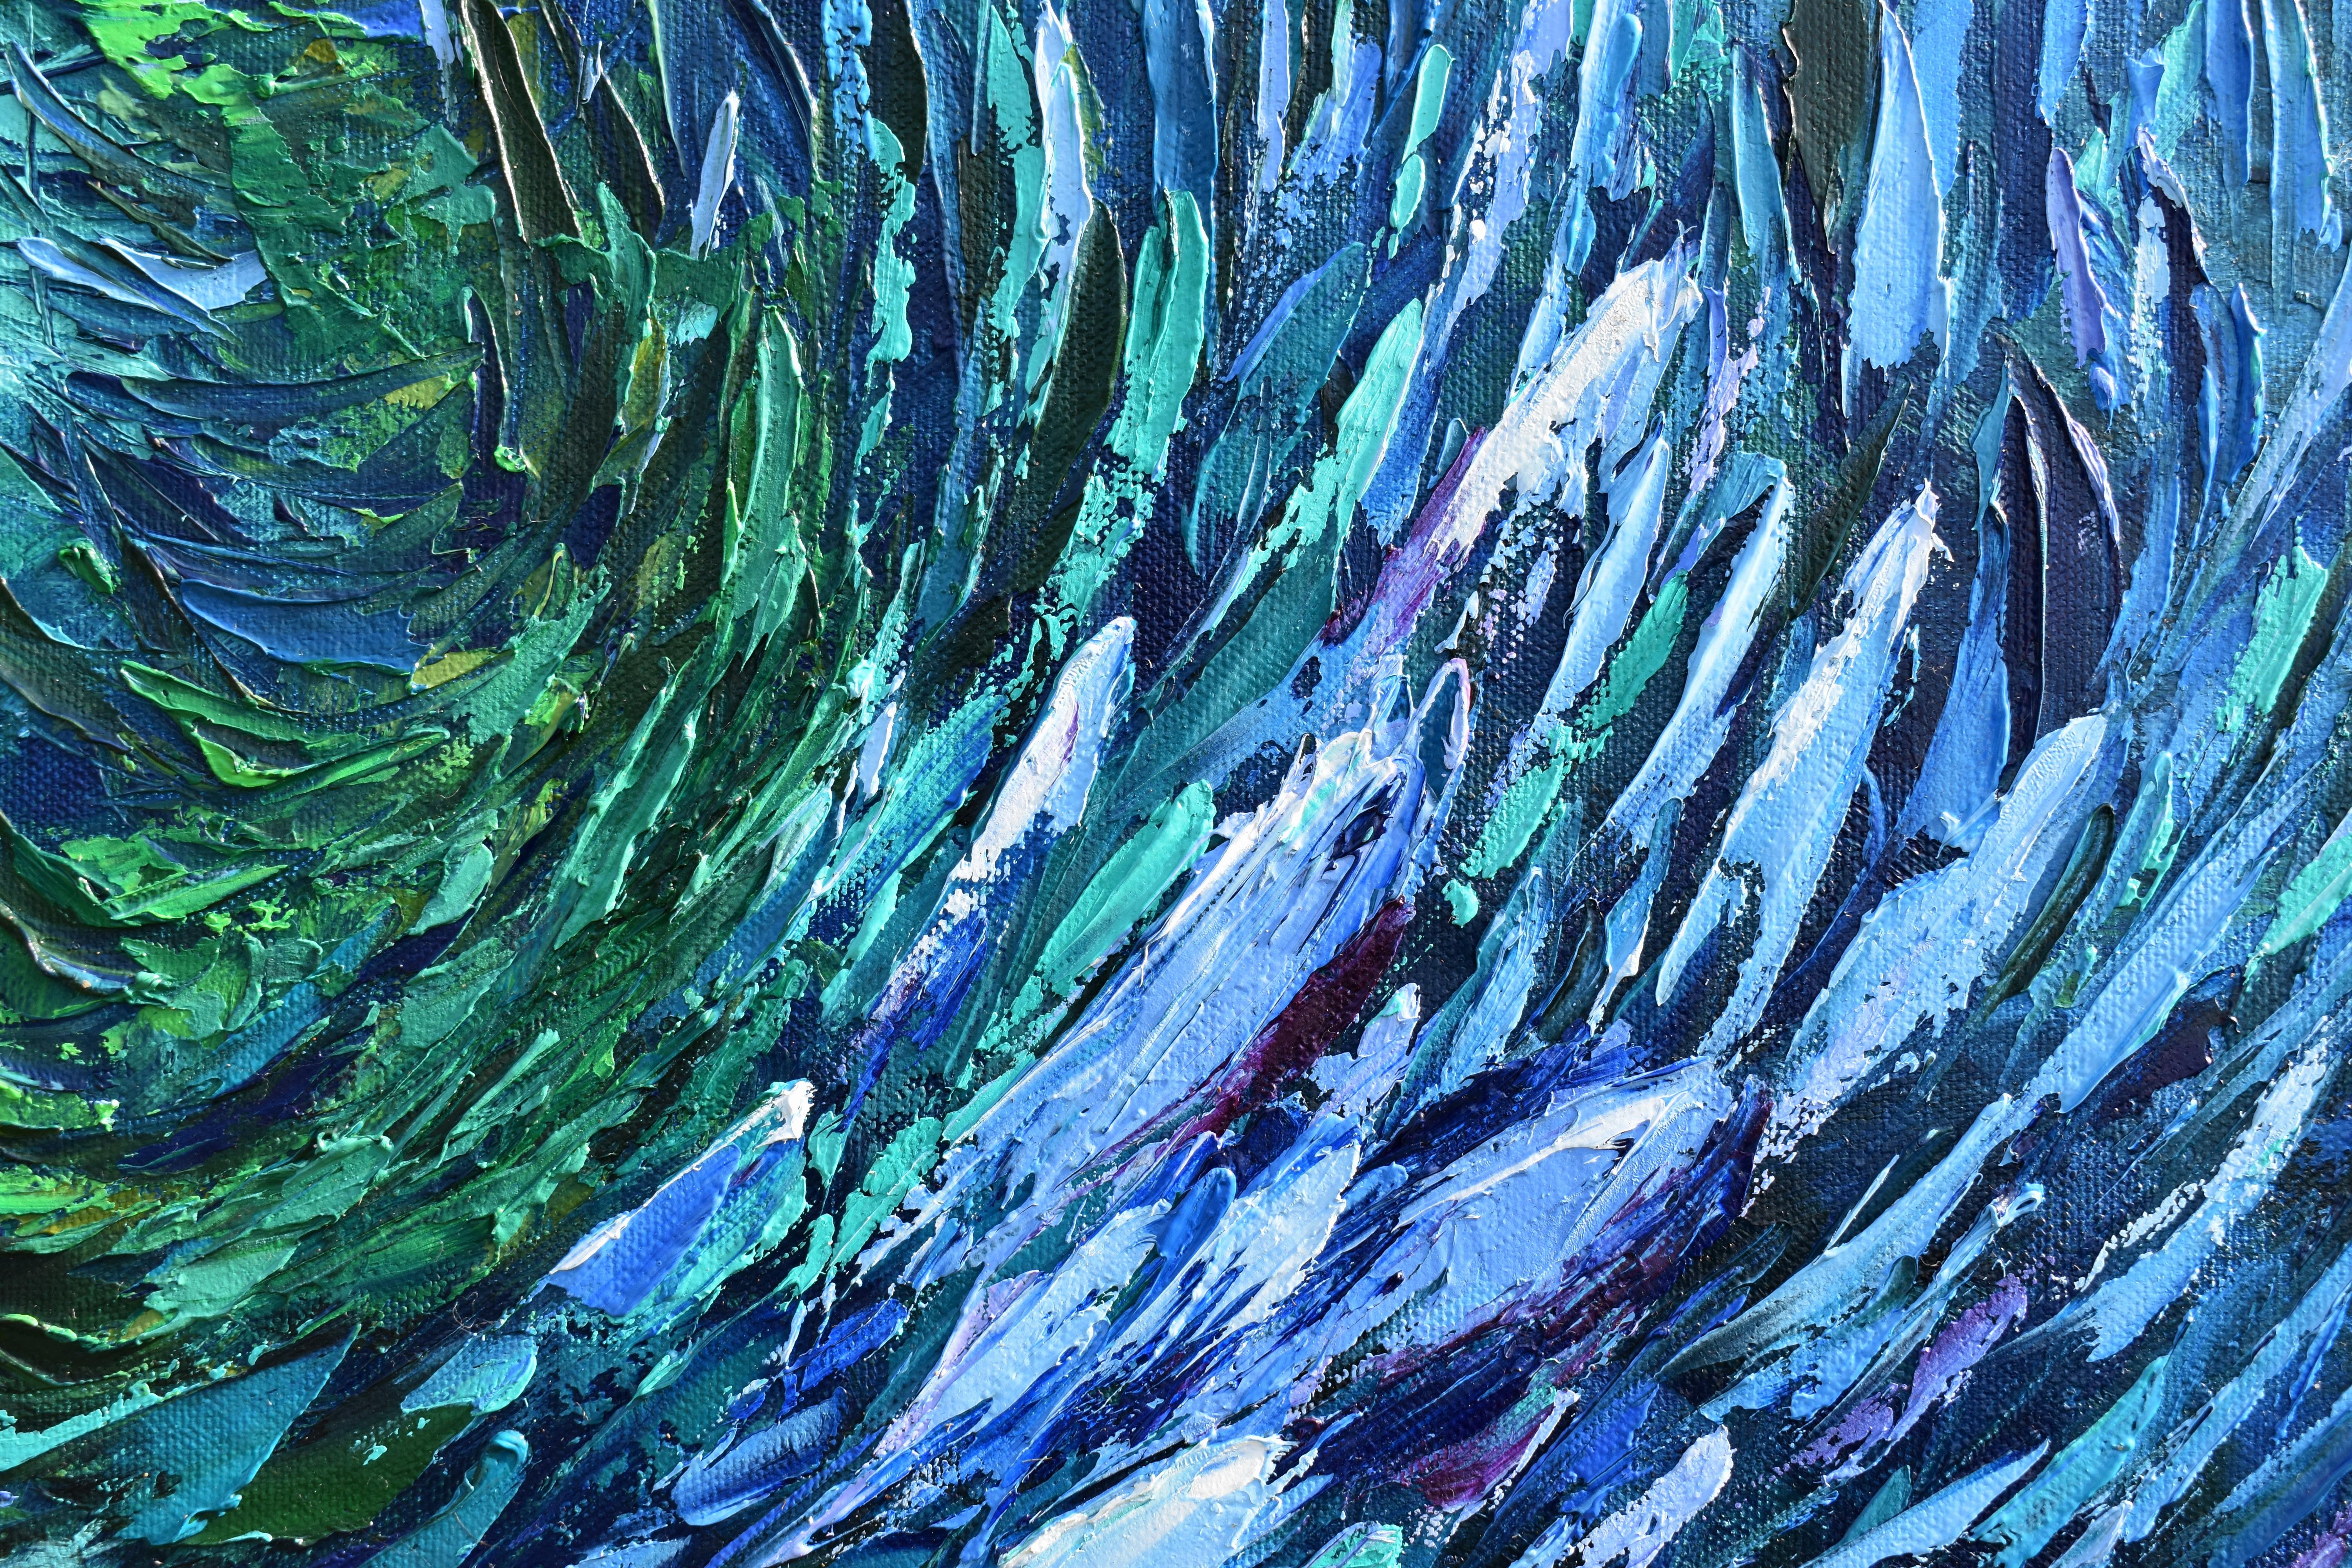 * Title: Sardine Run Bait Ball South africa
* Size: 90x90cm
* Materials: oil, canvas, palette knife
* Shipping: gallery standards packaging, express delivery with tracking number. Rolled, ships in tube or stretched on wooden frame.

Artist draw her